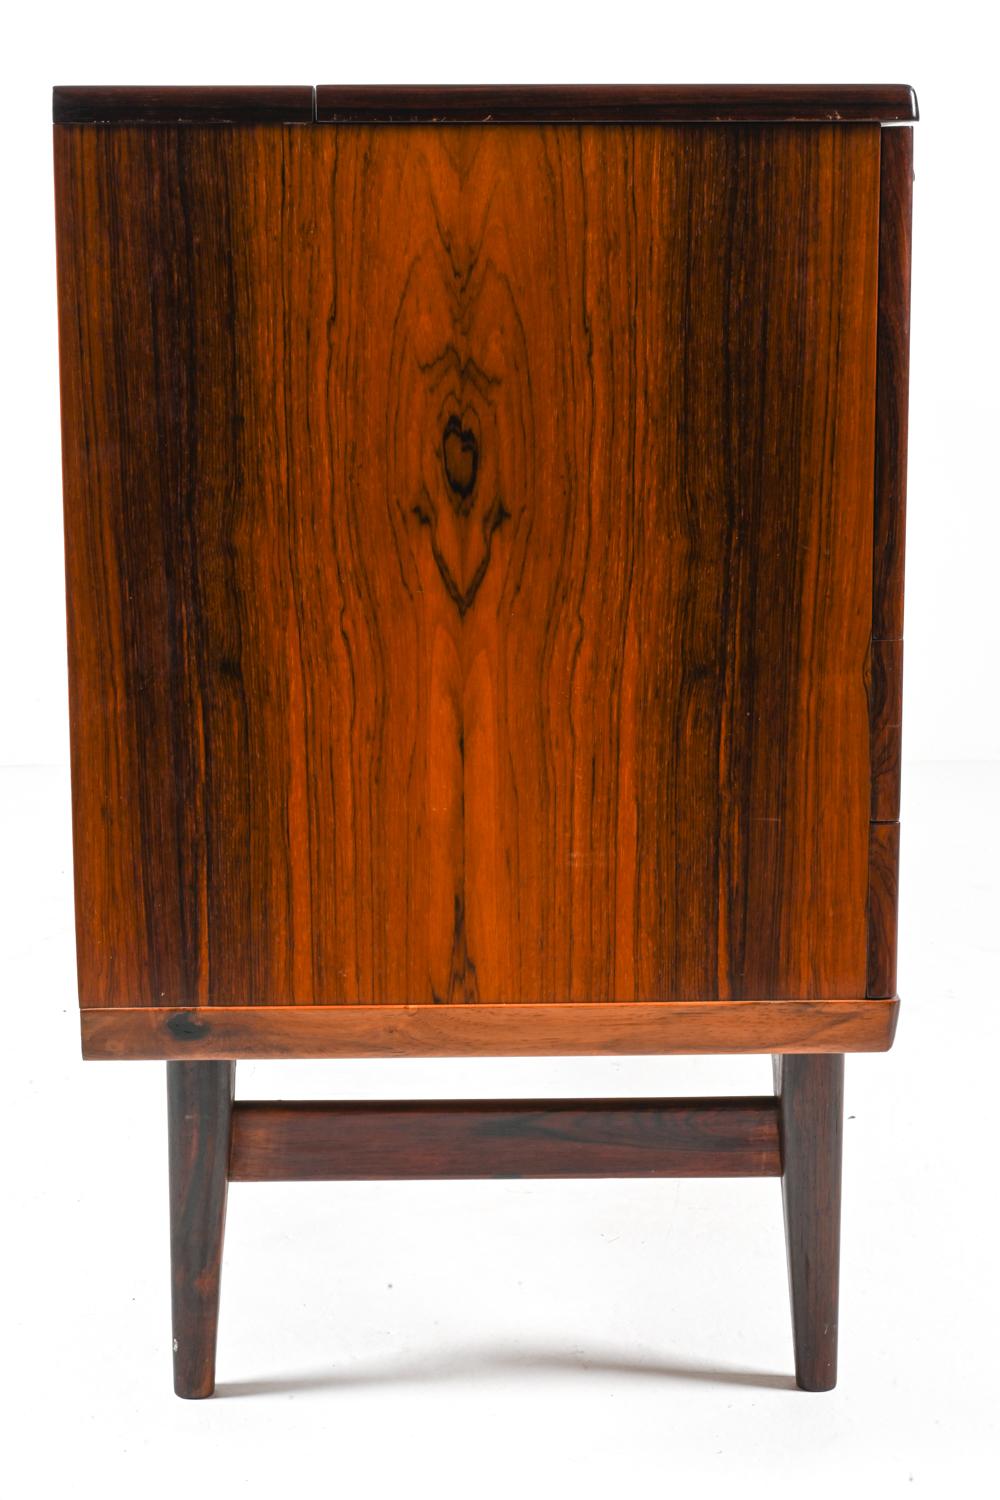 Rare Rosewood Sideboard With Bar by Johannes Andersen; Denmark, c. 1960's For Sale 11